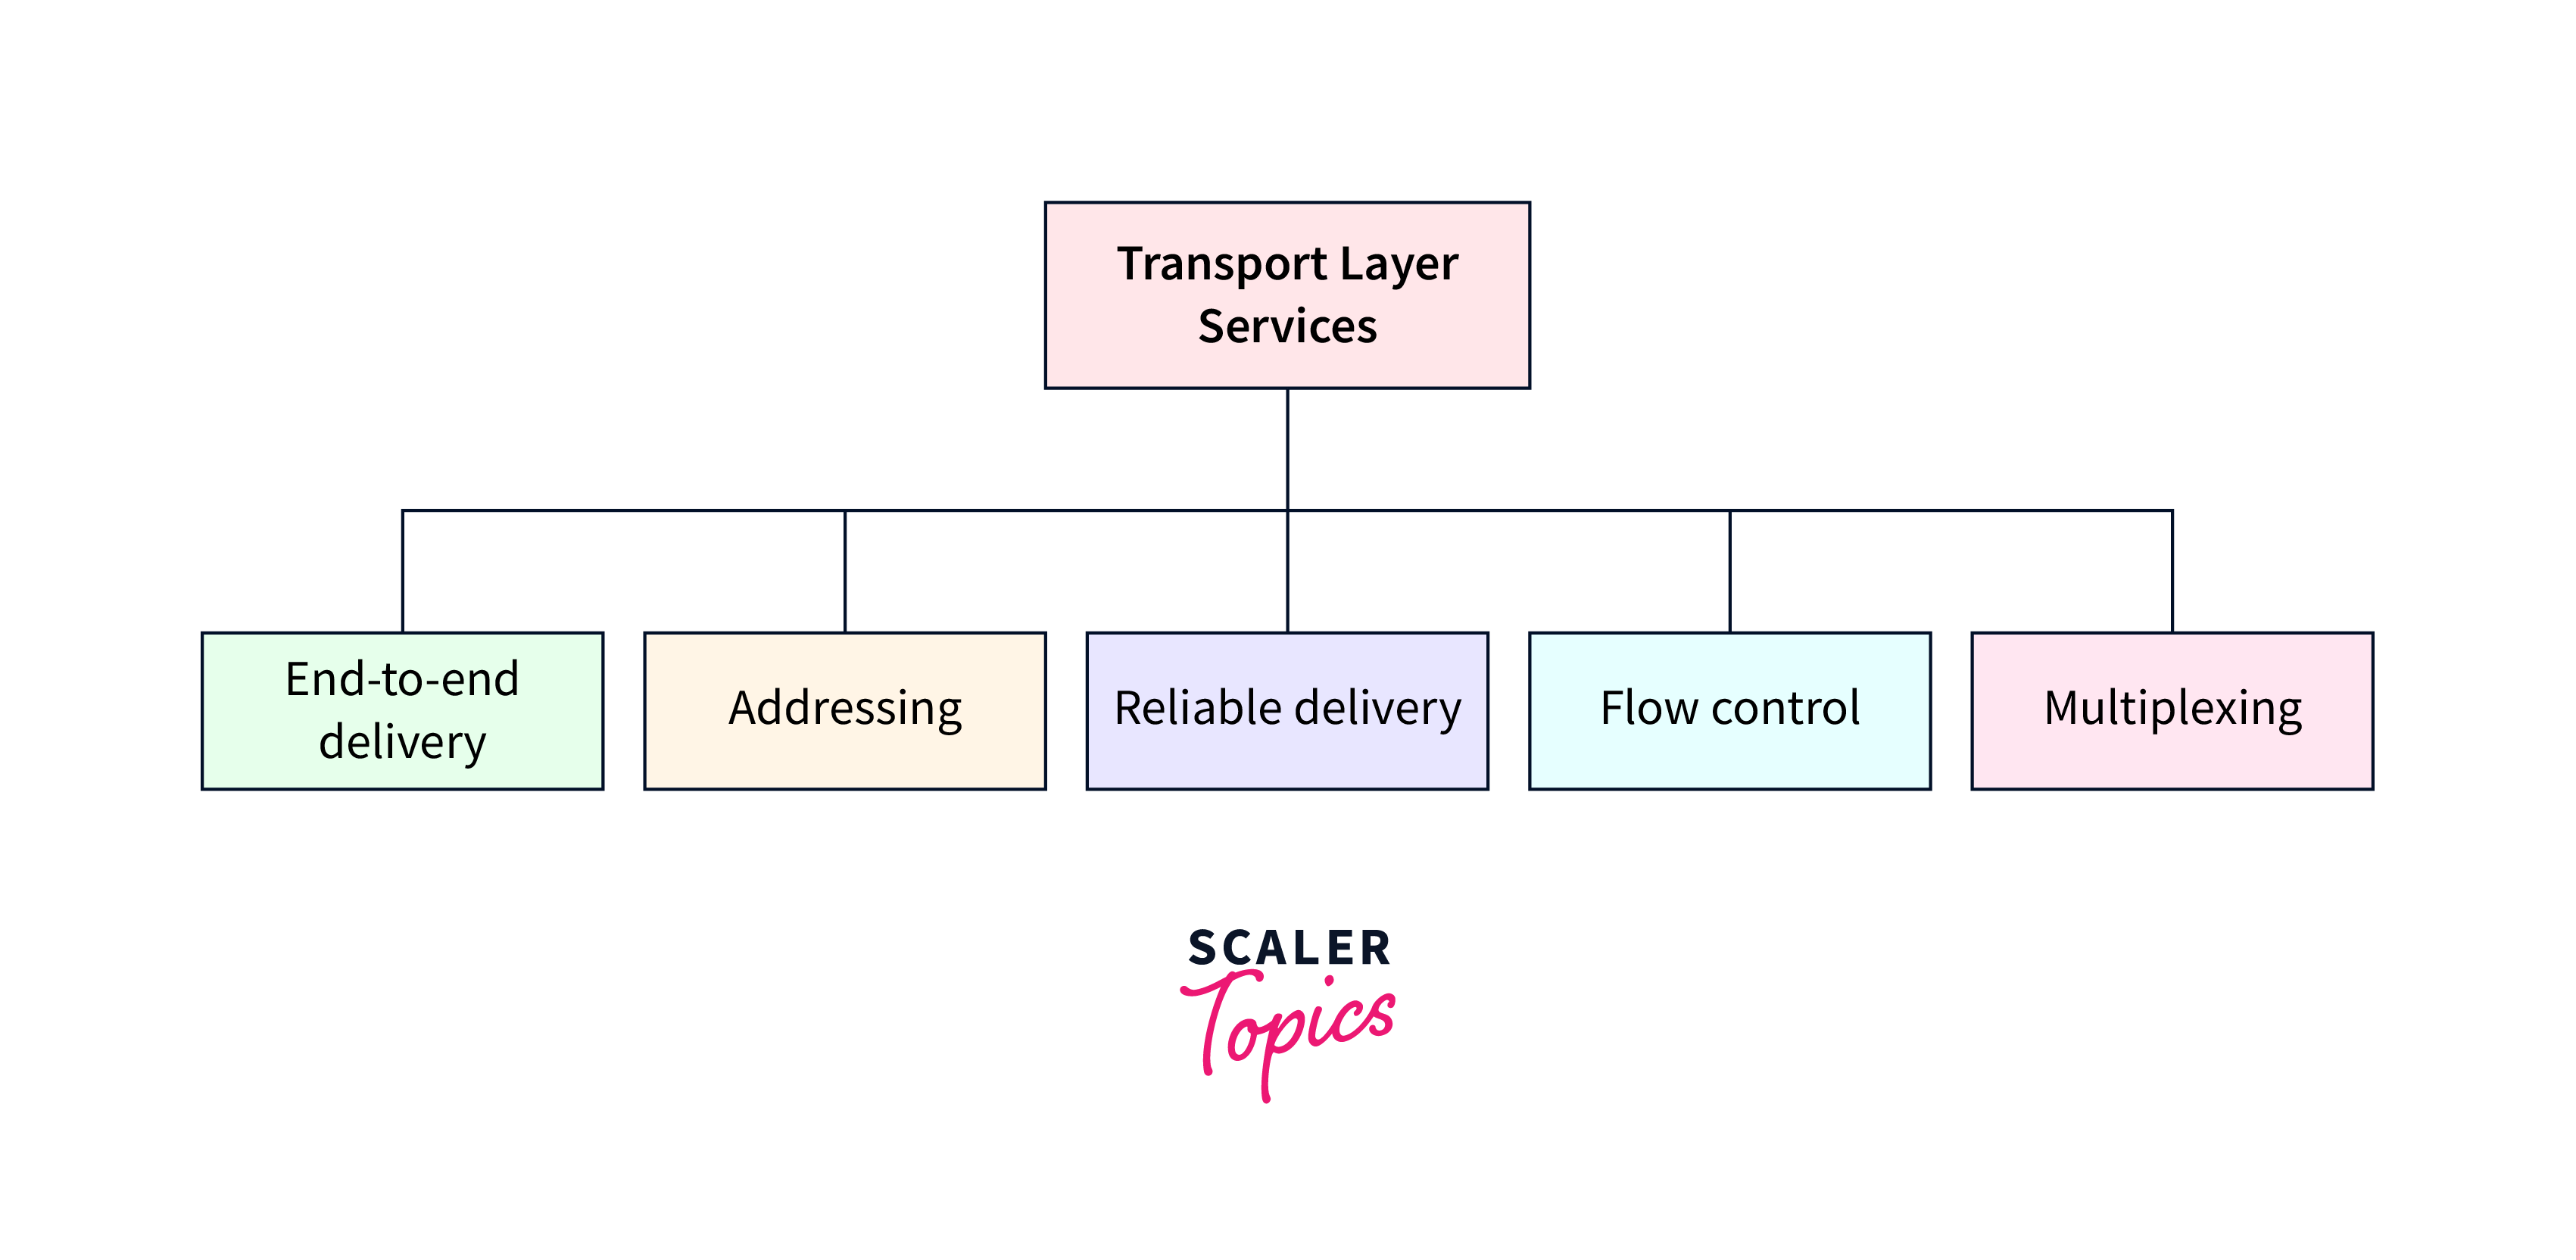  Transport layer services